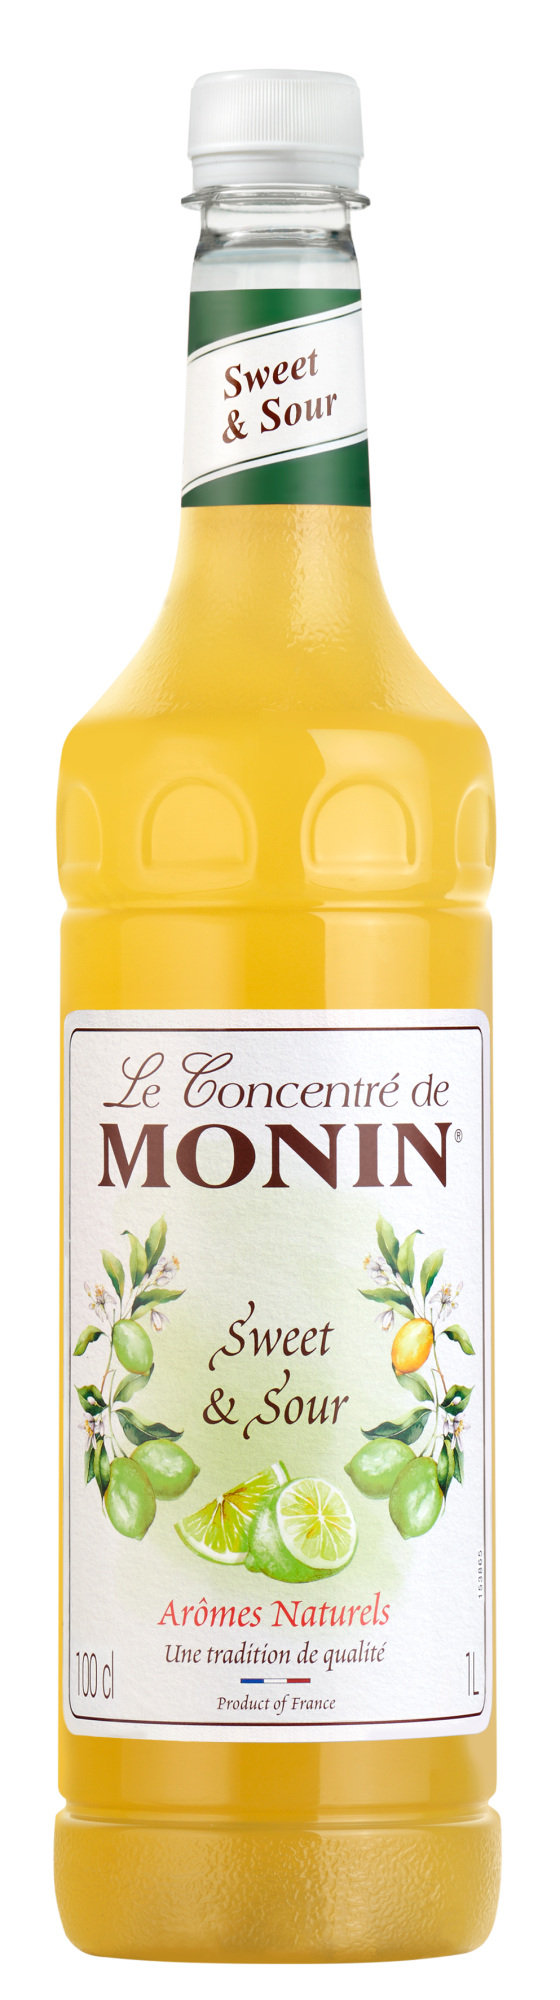 MONIN Premium Sweet and Sour Syrup 1L